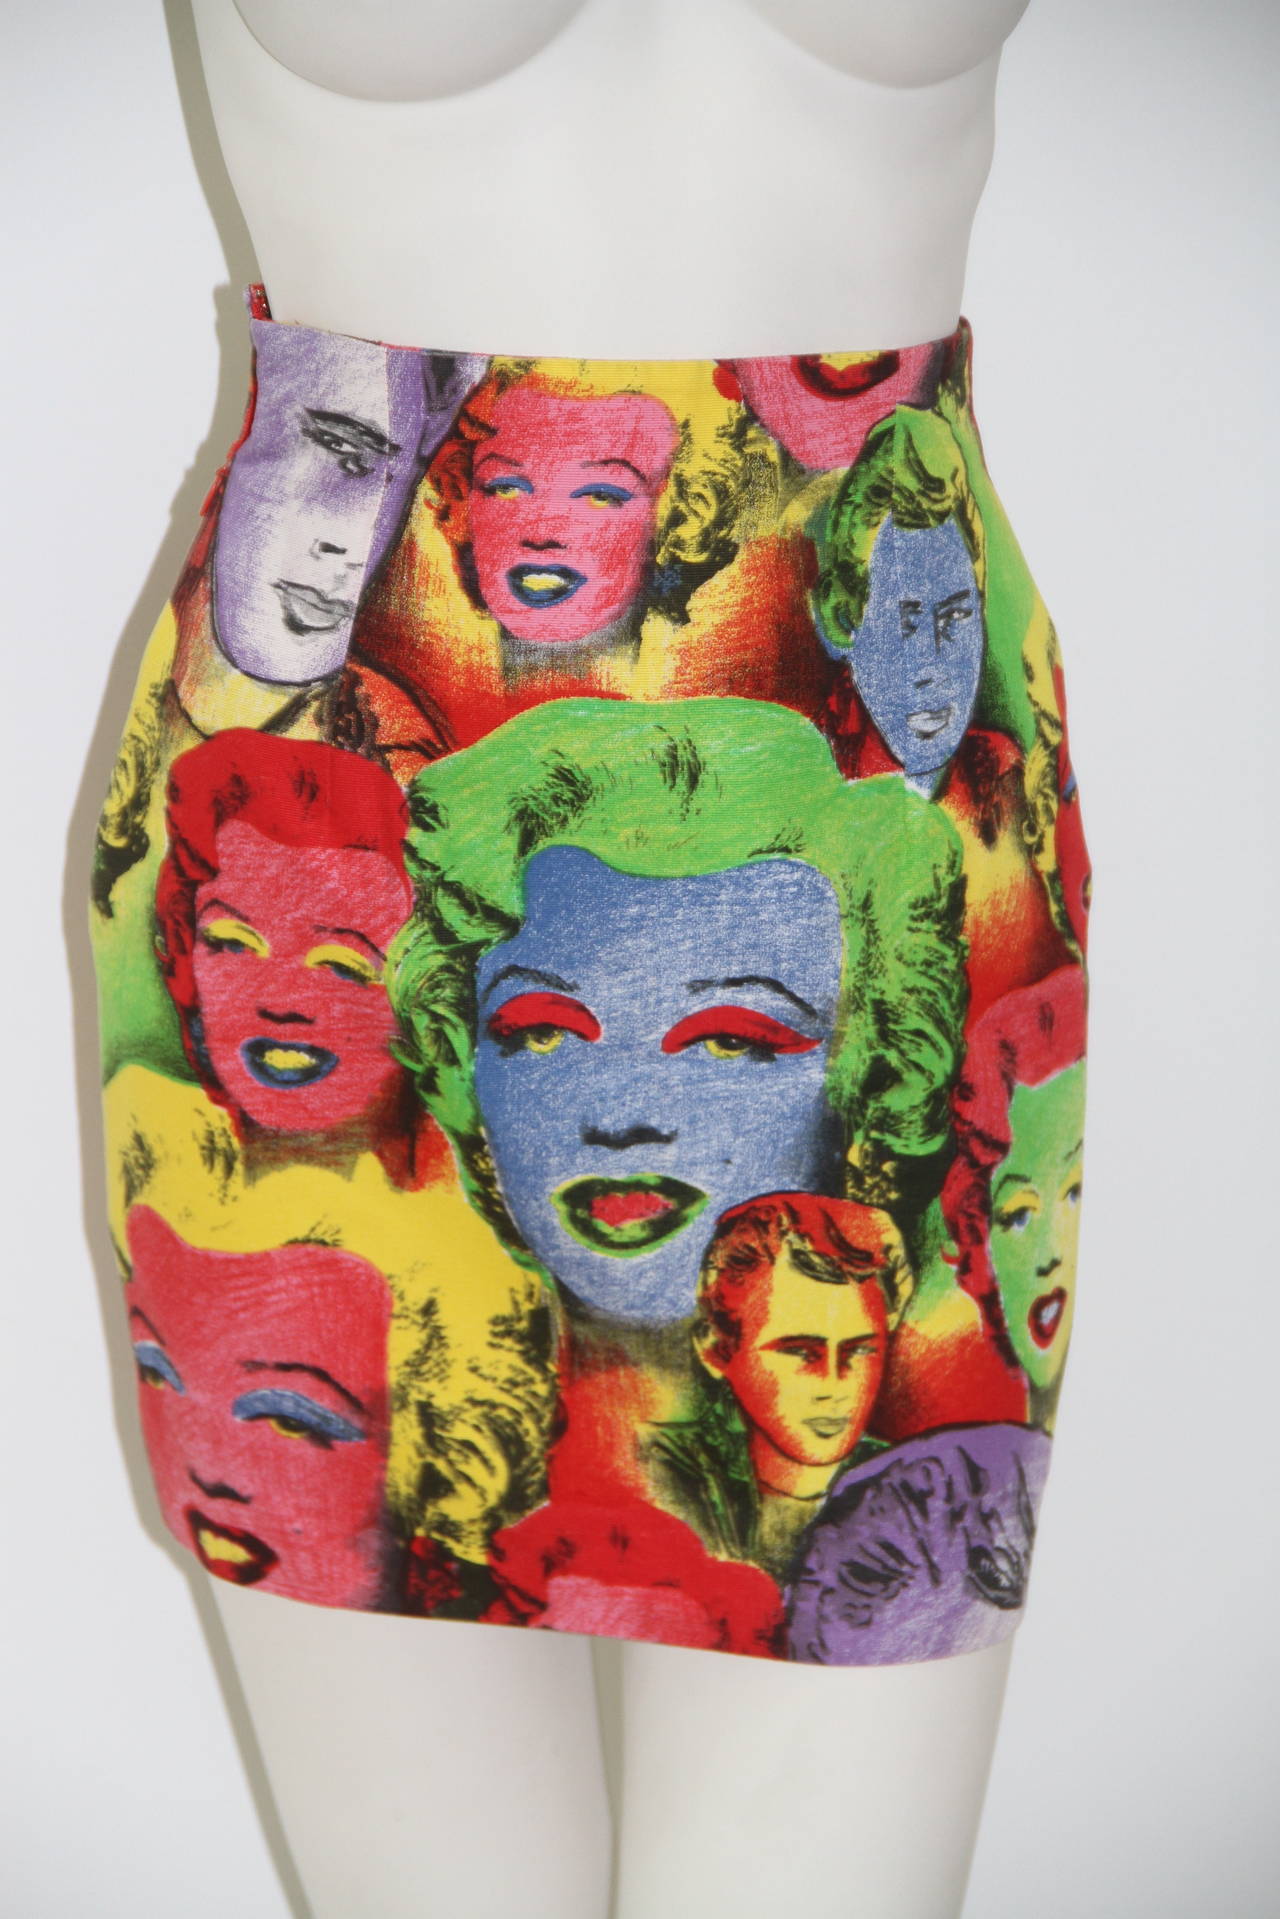 Iconic Gianni Versace silk jersey top and skirt ensemble, featuring polychrome images of Marilyn Monroe and James Dean from the Spring 1991 Pop Art collection.

Marked an Italian size 38.

Manufacturer - Alias S.p.a.